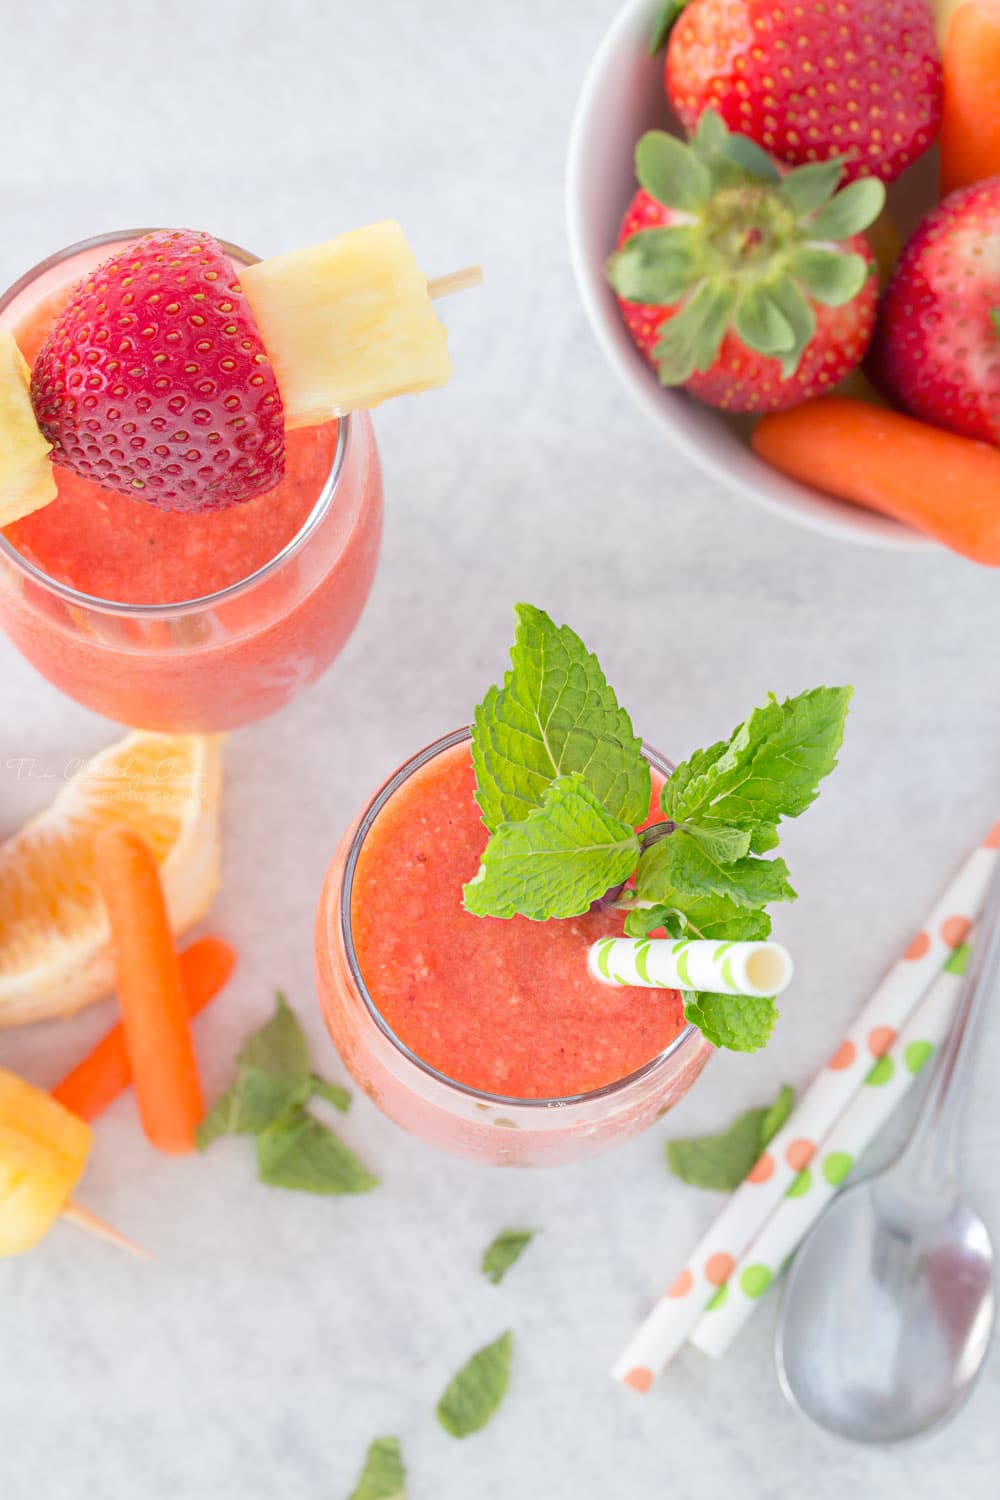 Tropical Carrot Smoothie | This simple to make carrot smoothie is bursting with tropical flavors and is so full of nutrients... healthy never tasted so good! | http://thechunkychef.com